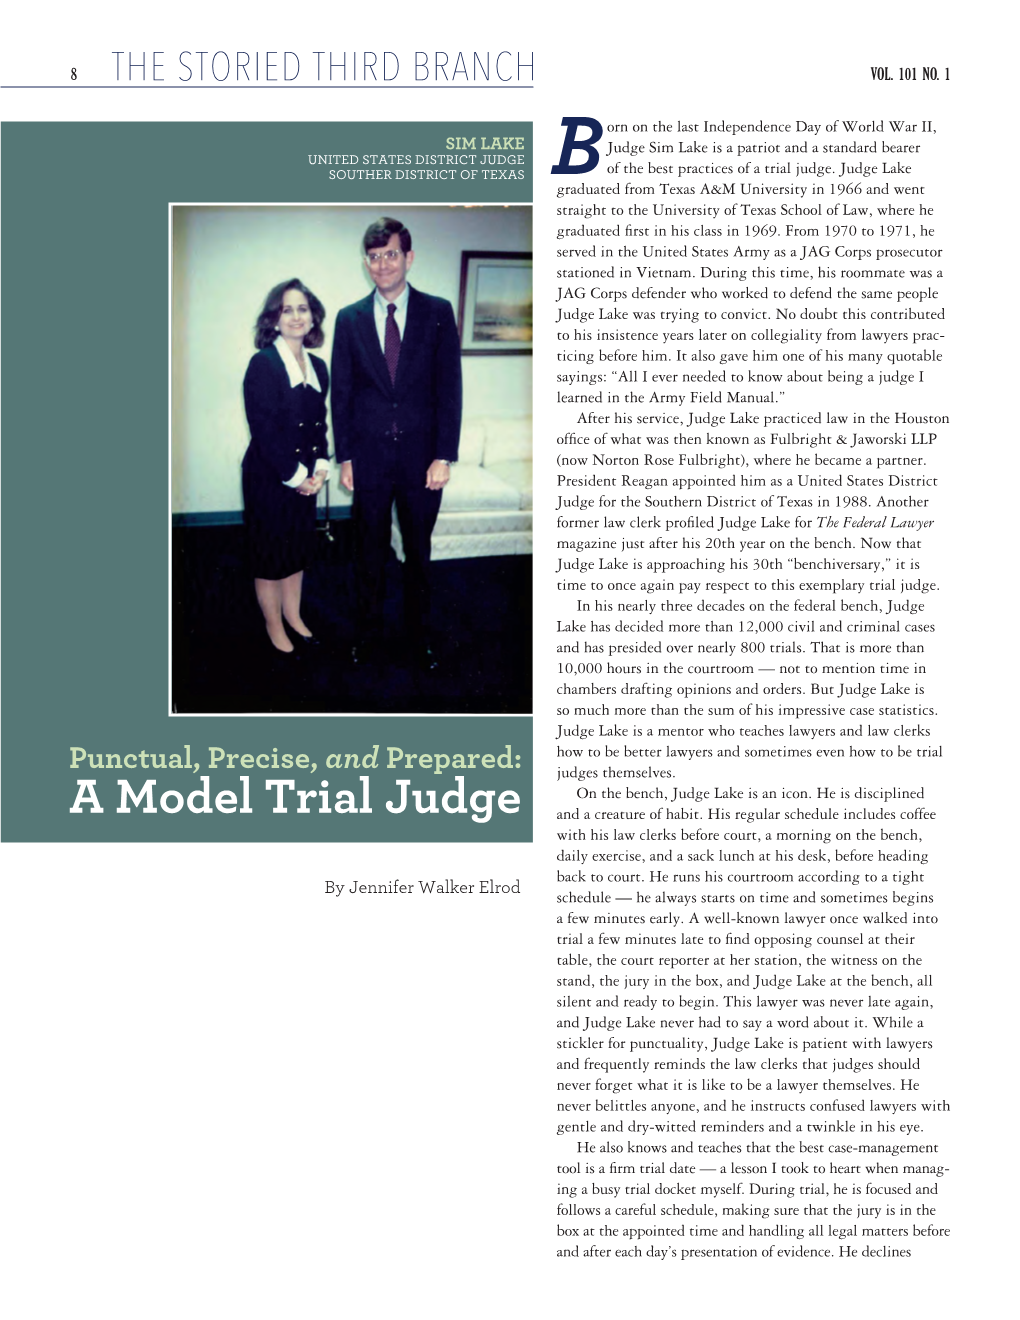 A Model Trial Judge and a Creature of Habit